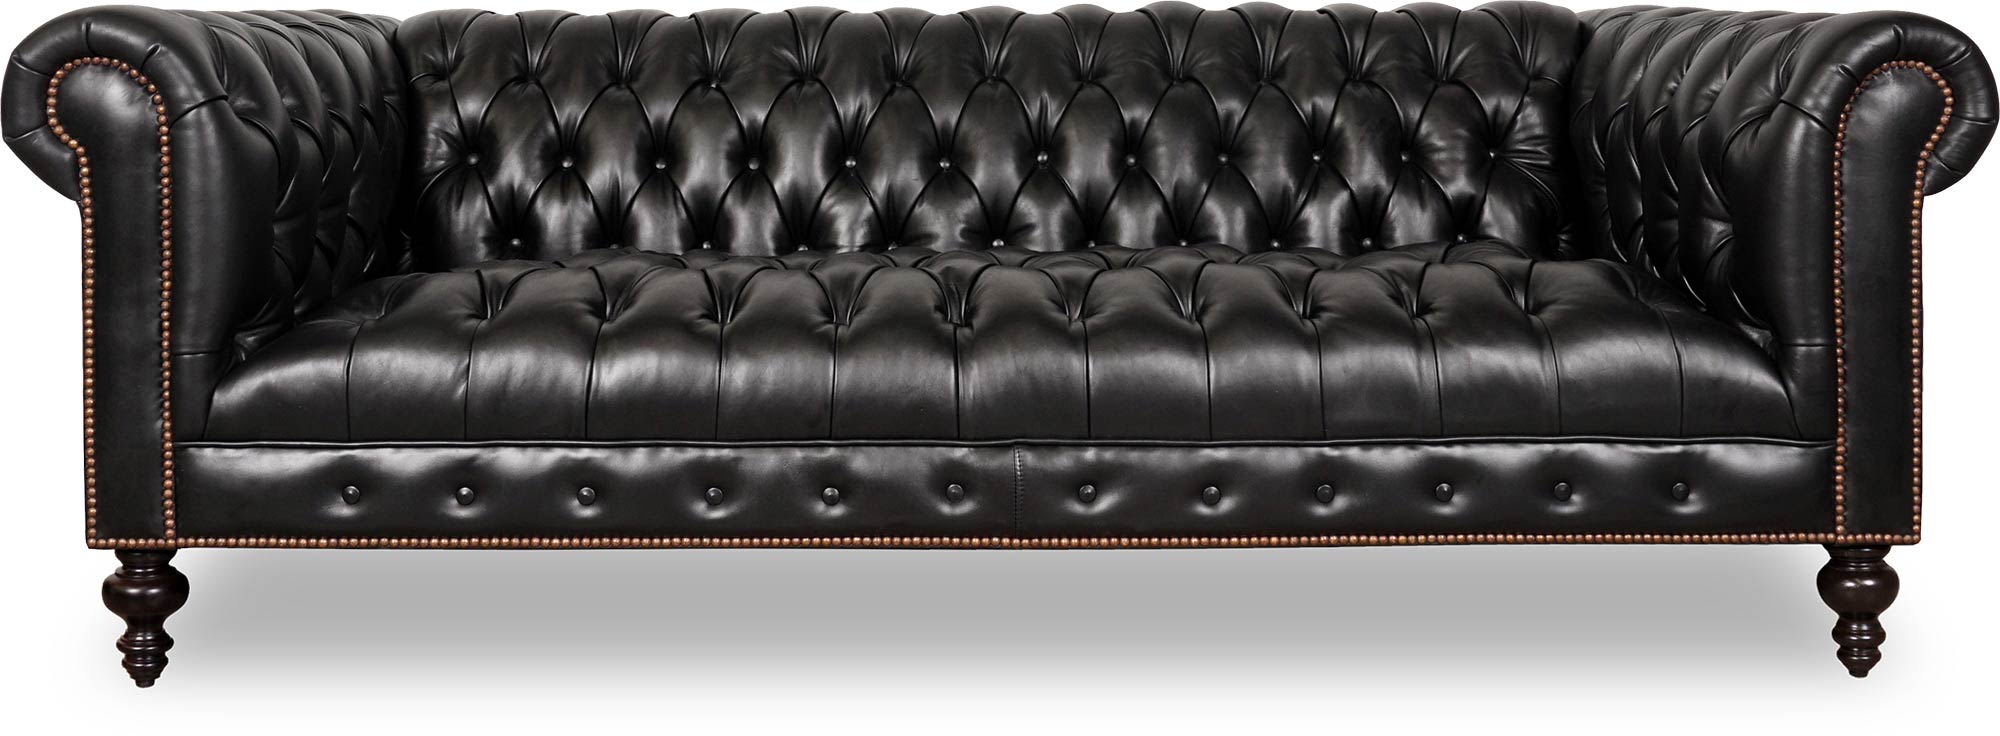 Chesterfield Sofas Armchairs, What Is A Real Chesterfield Sofa